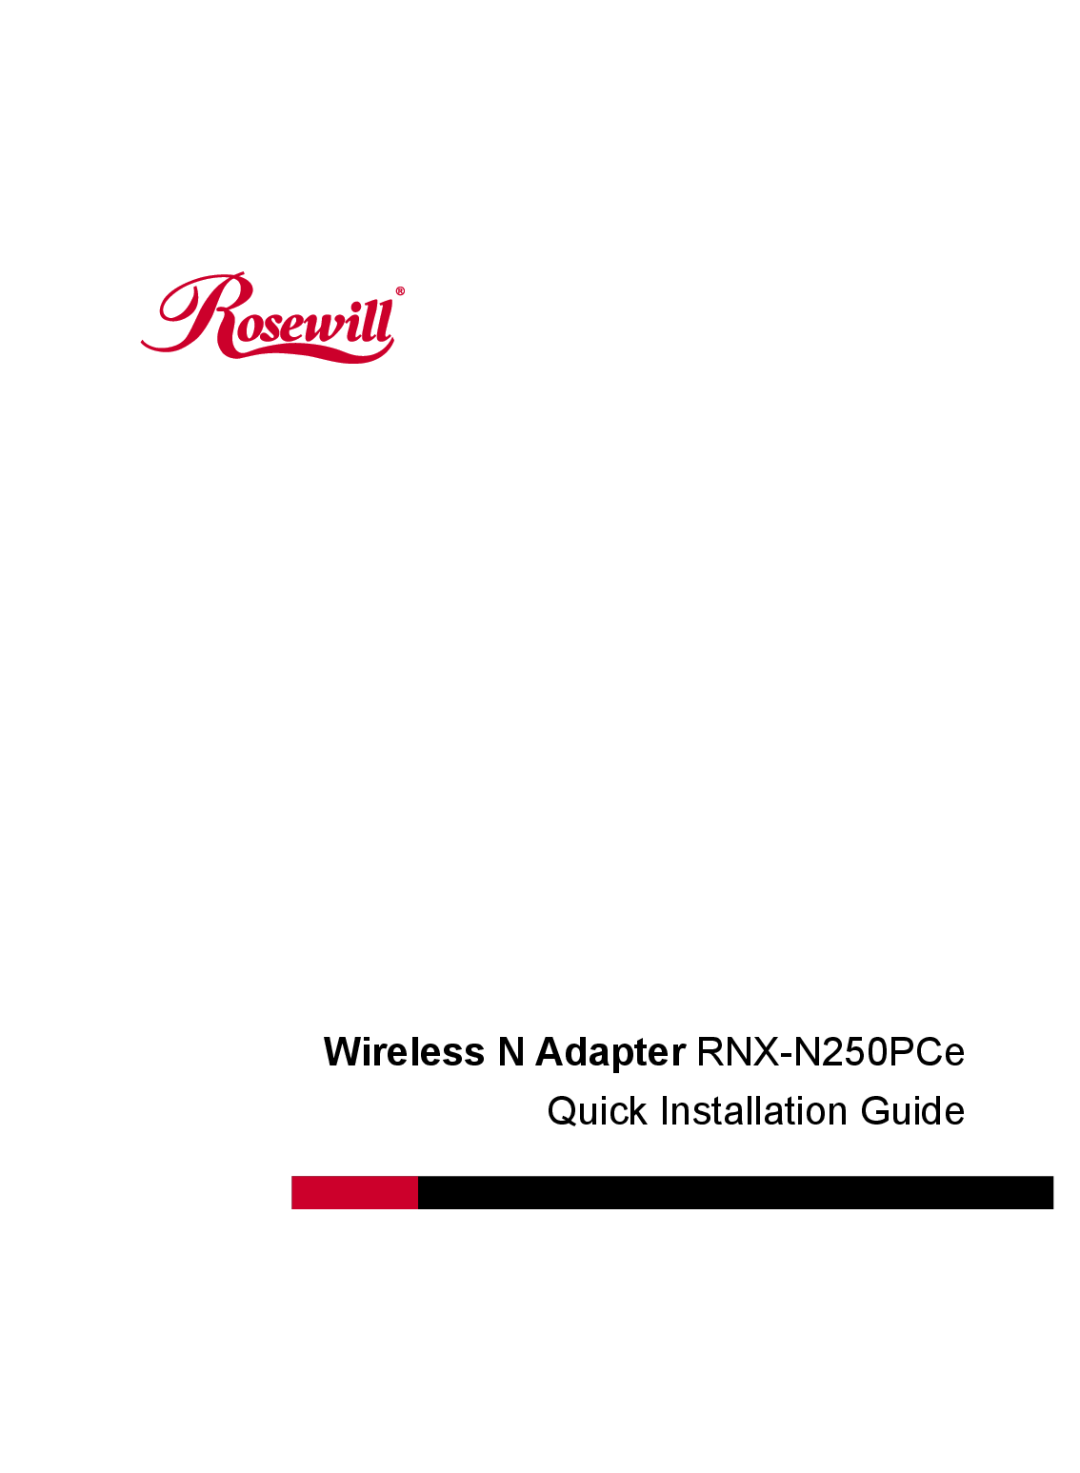 Rosewill manual Wireless N Adapter RNX-N250PCe, Quick Installation Guide 